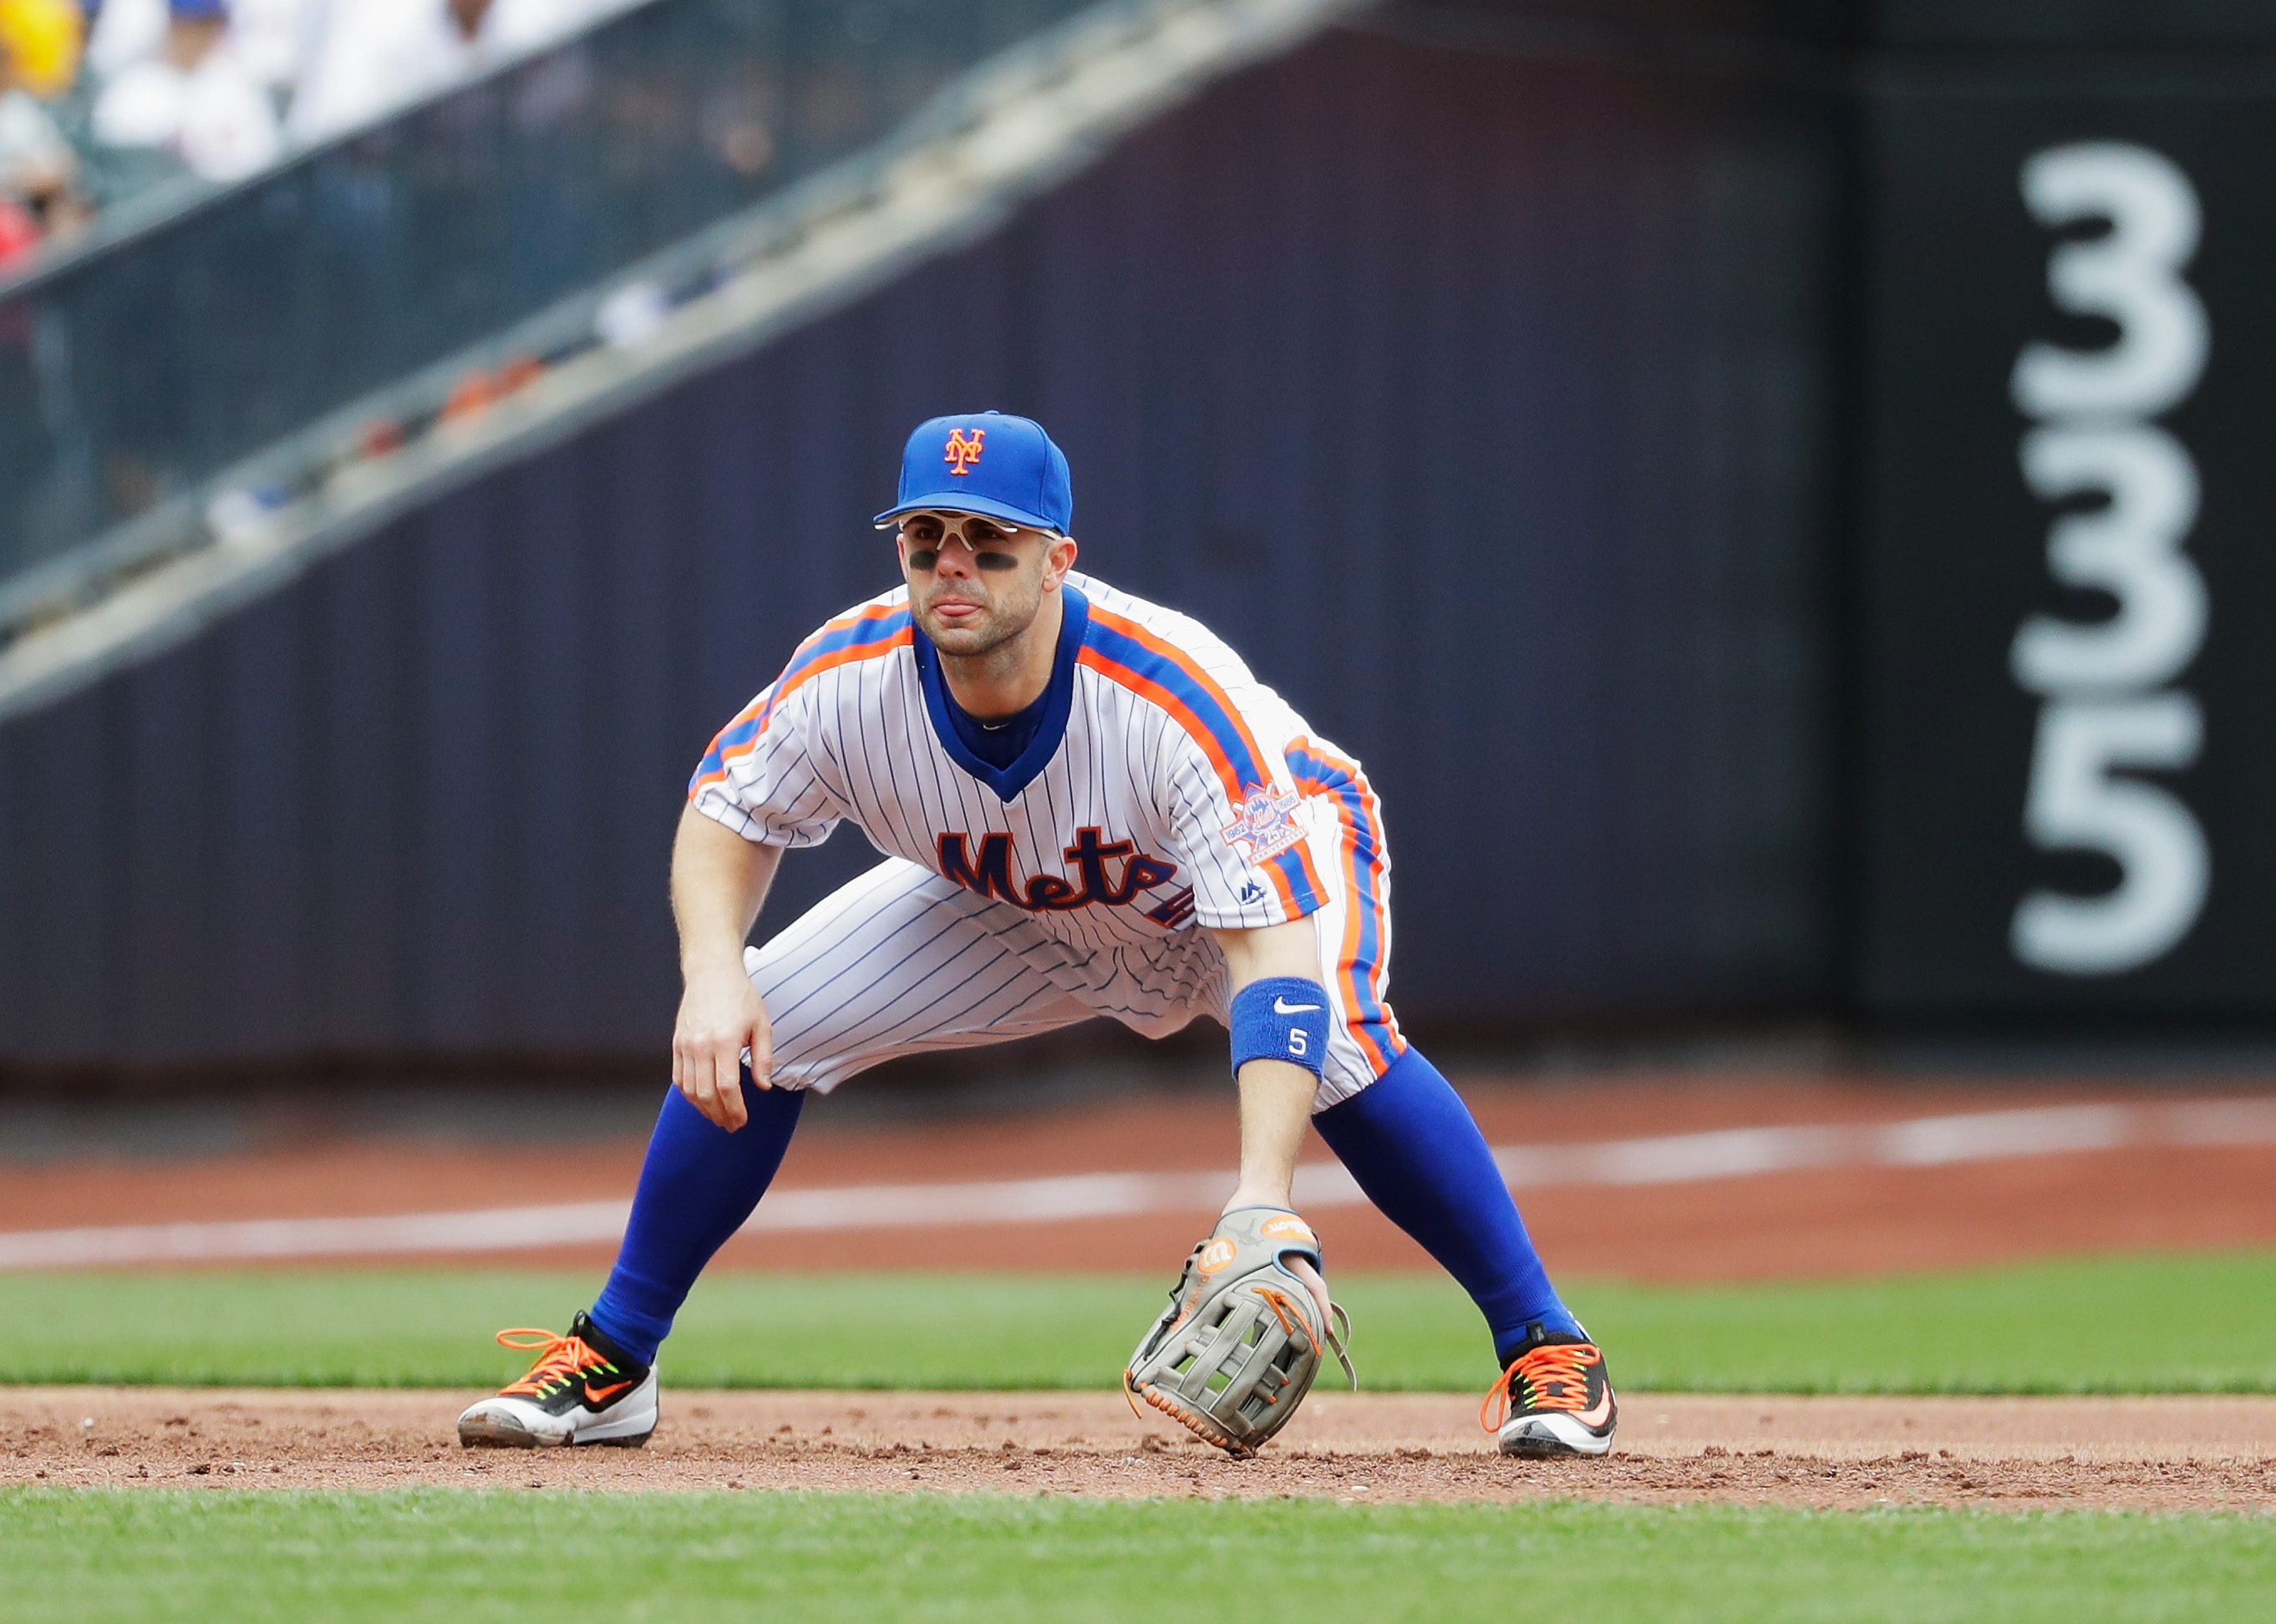 David Wright gives Mets walk-off win over Brewers